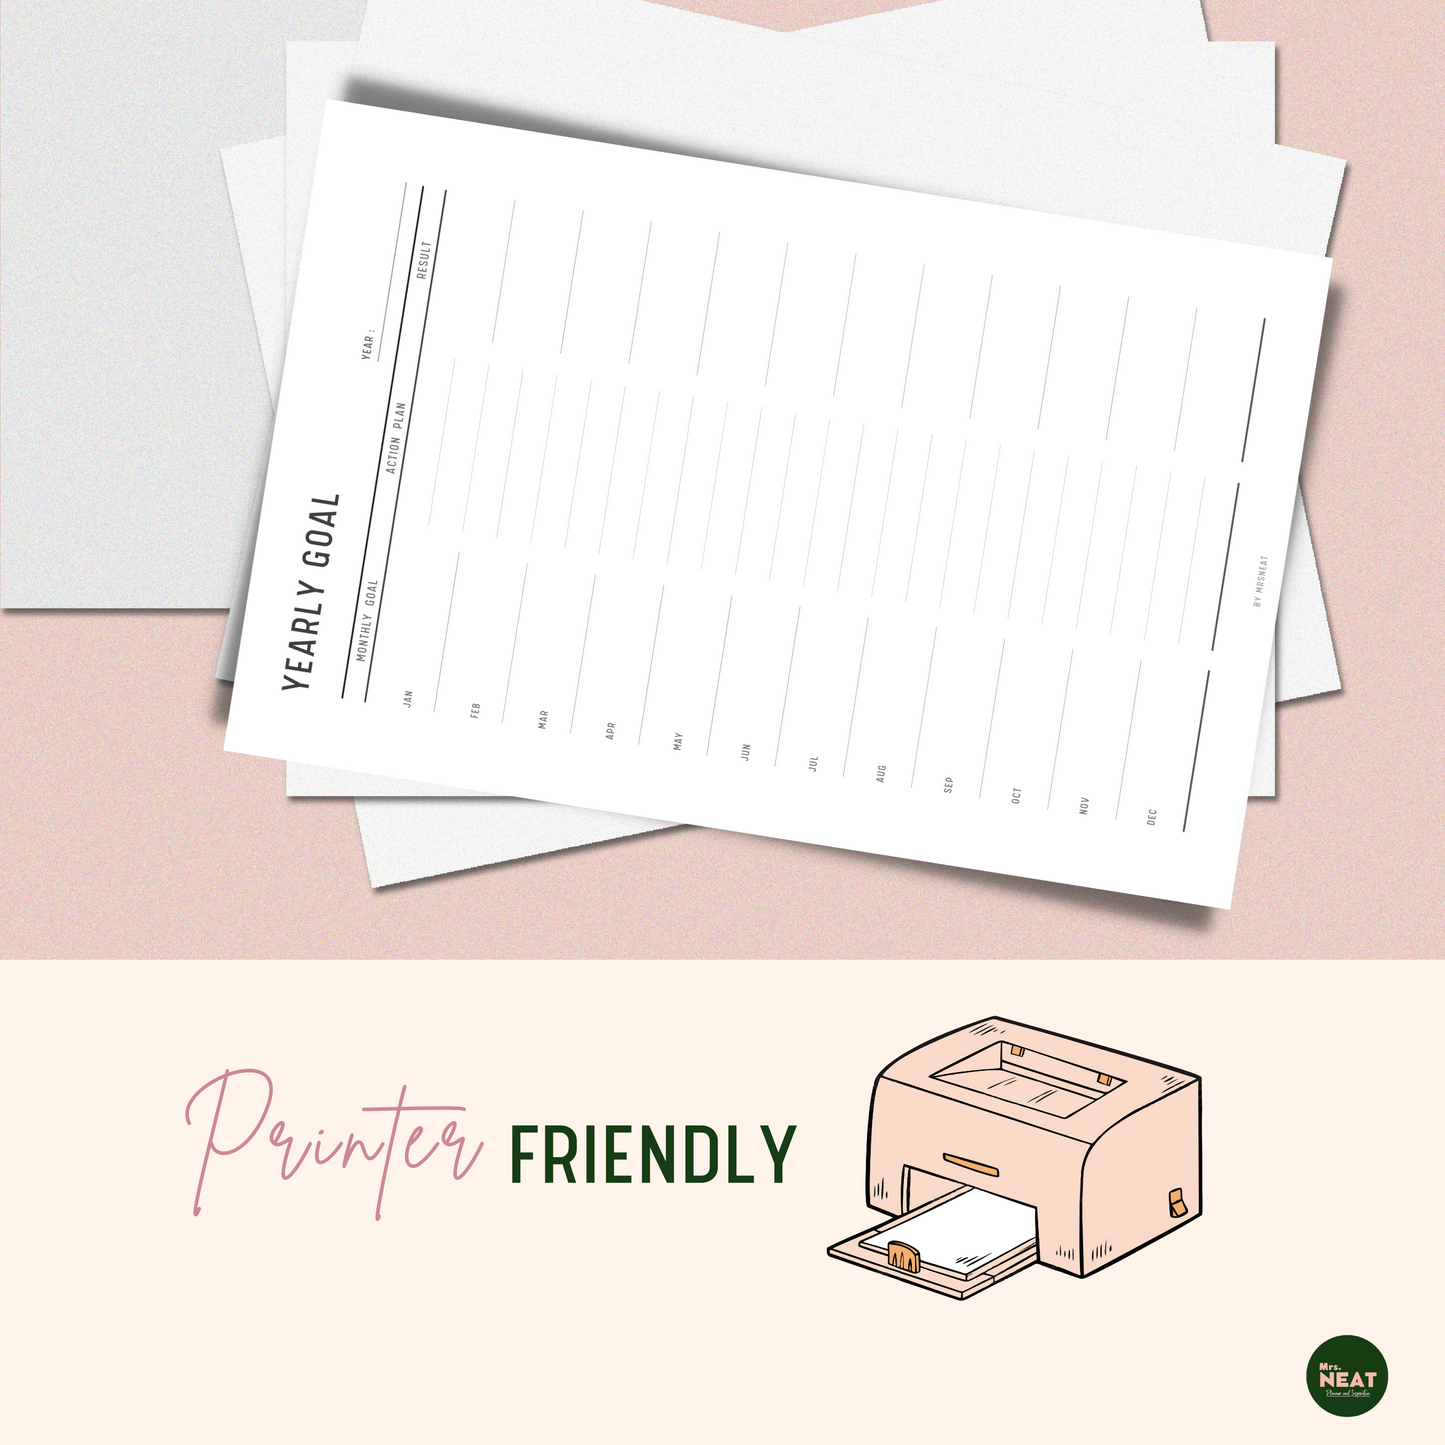 Yearly Goal Planner Printable printed out from cute pink printer